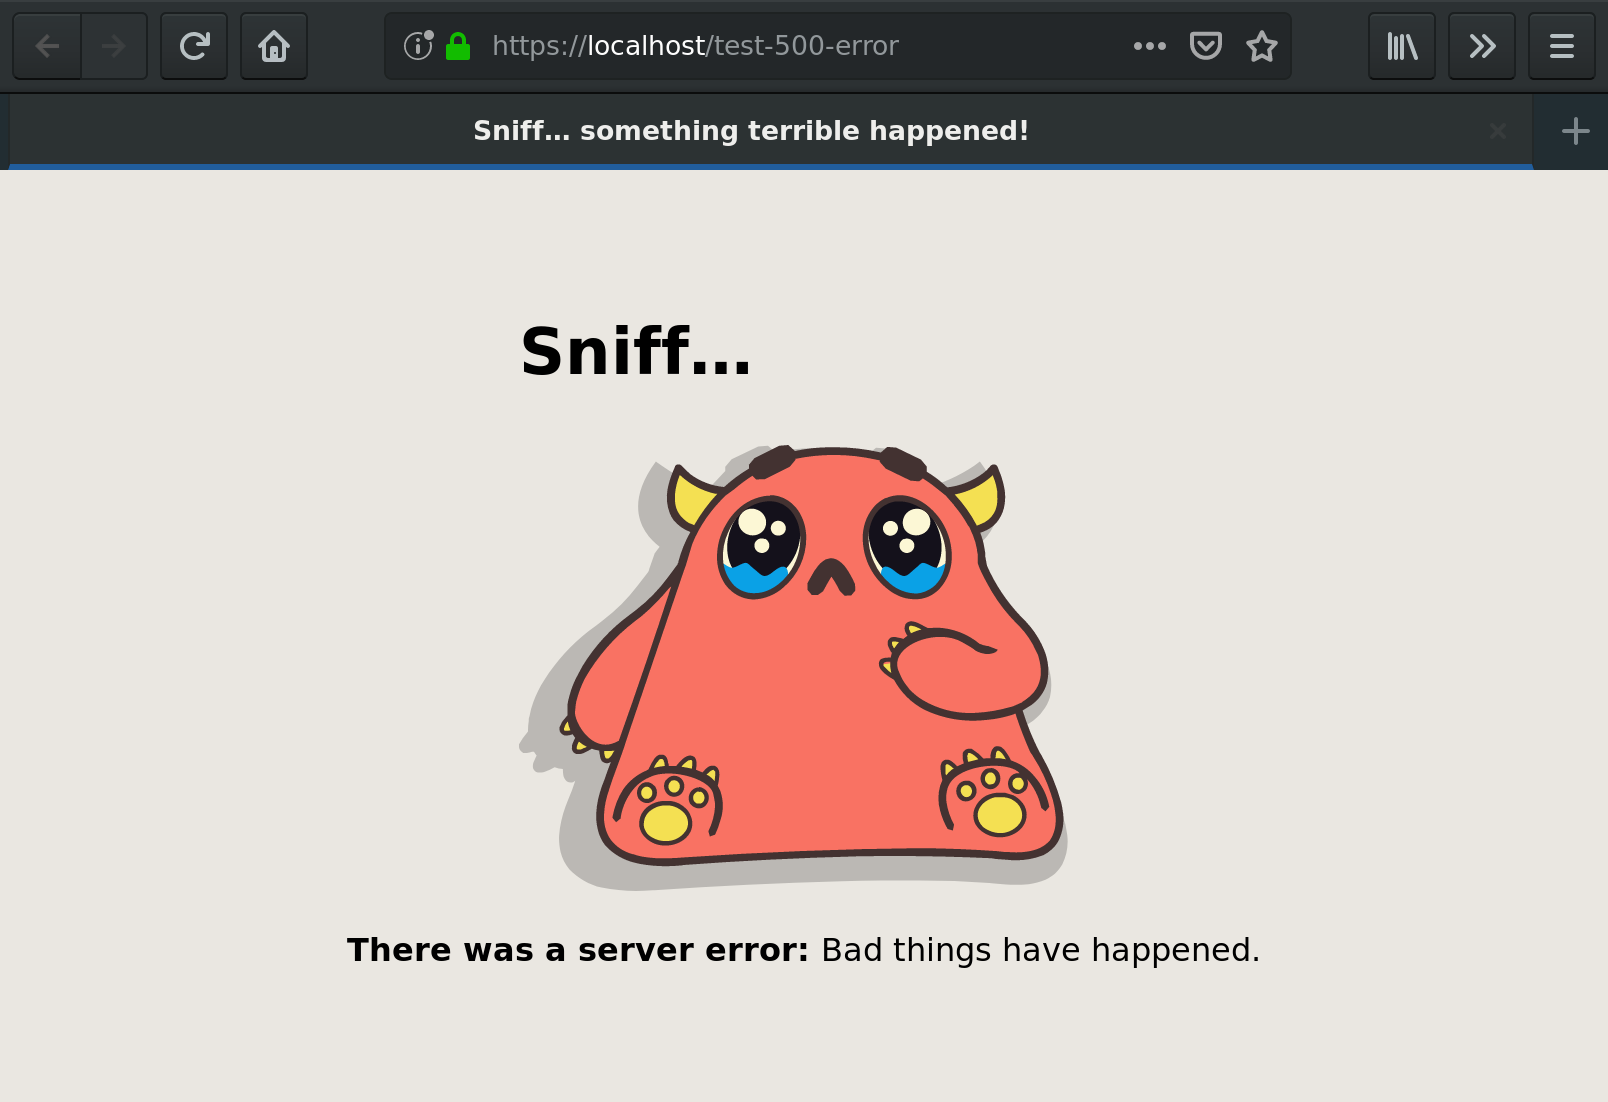 A pink monster with tears welling up in its eyes. The text reads: “Sniff… There was a server error: Bad things have happened.